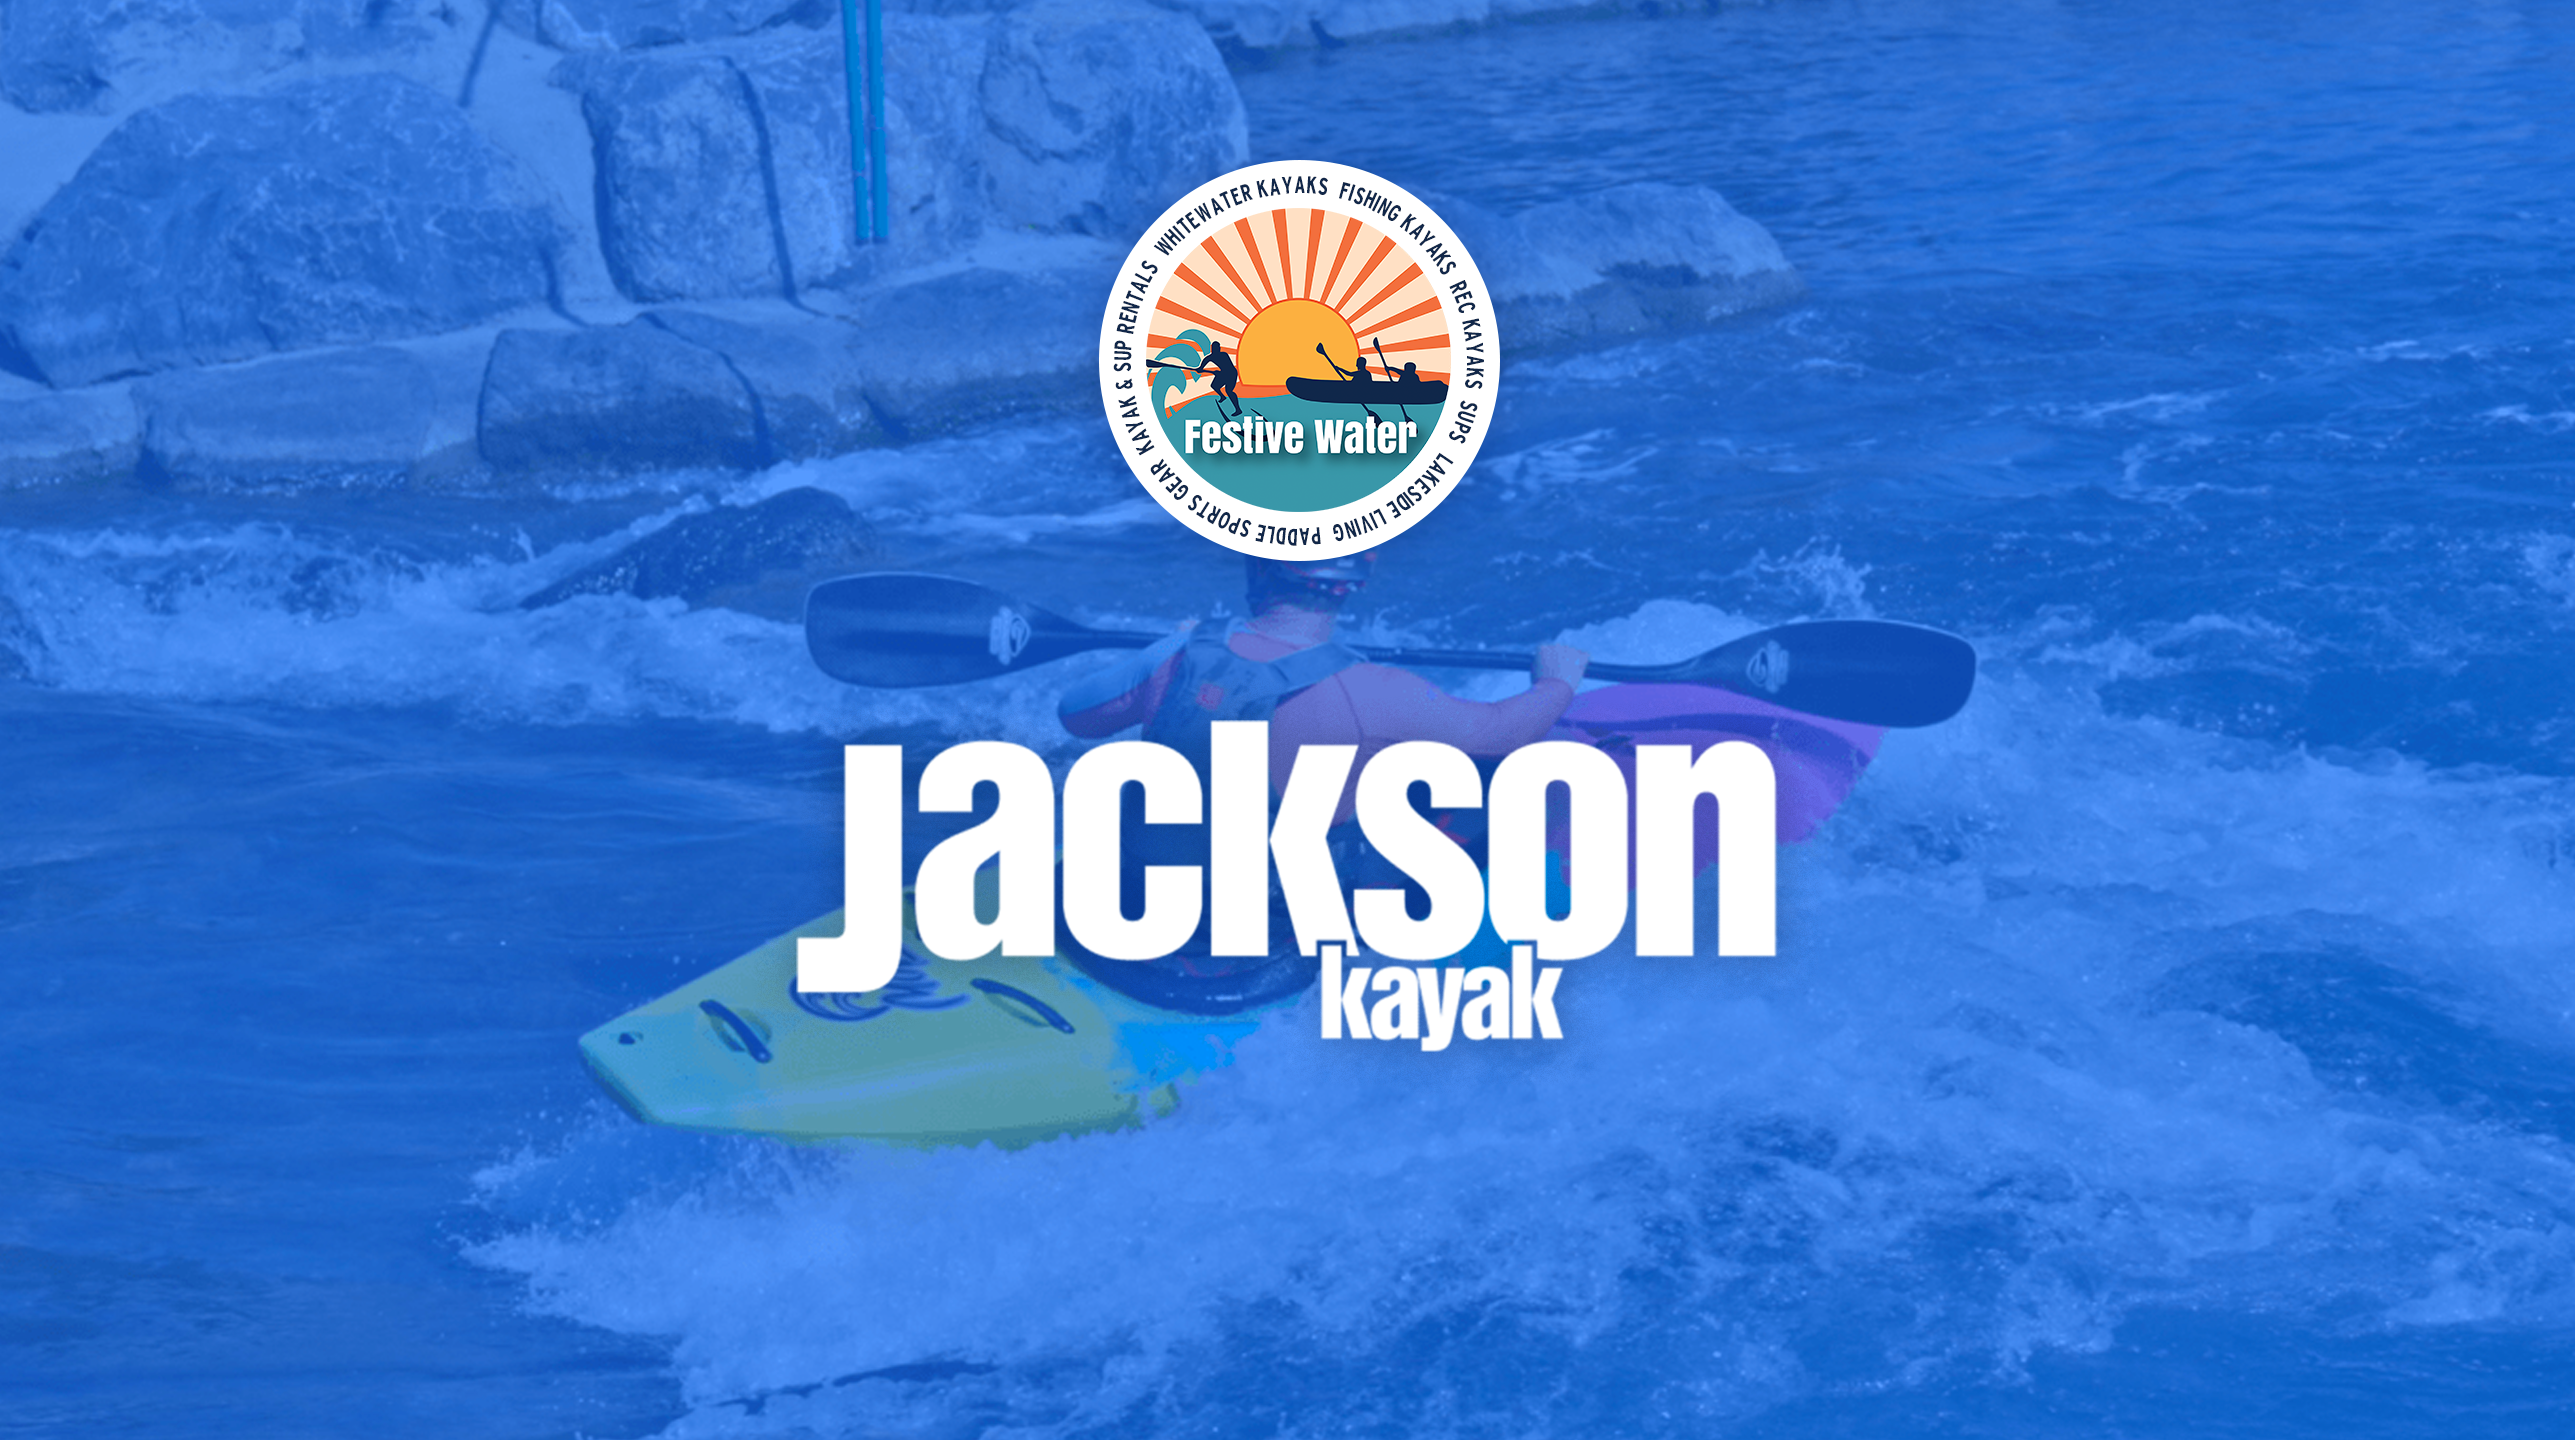 Jackson Kayak Now Available at Festive Water